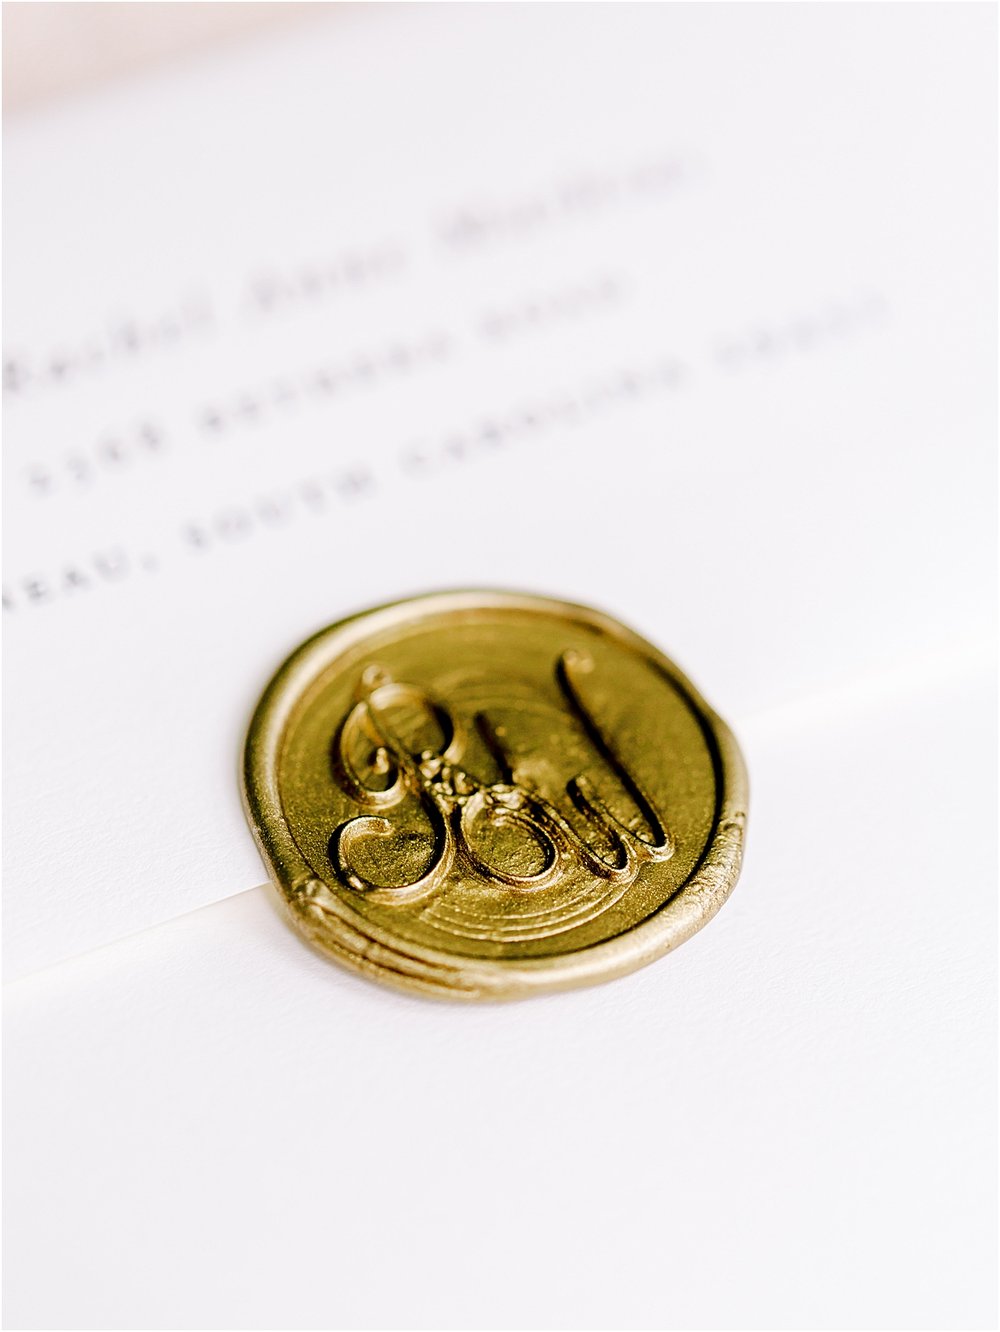 Gold monogrammed wax seal for wedding invitation suite